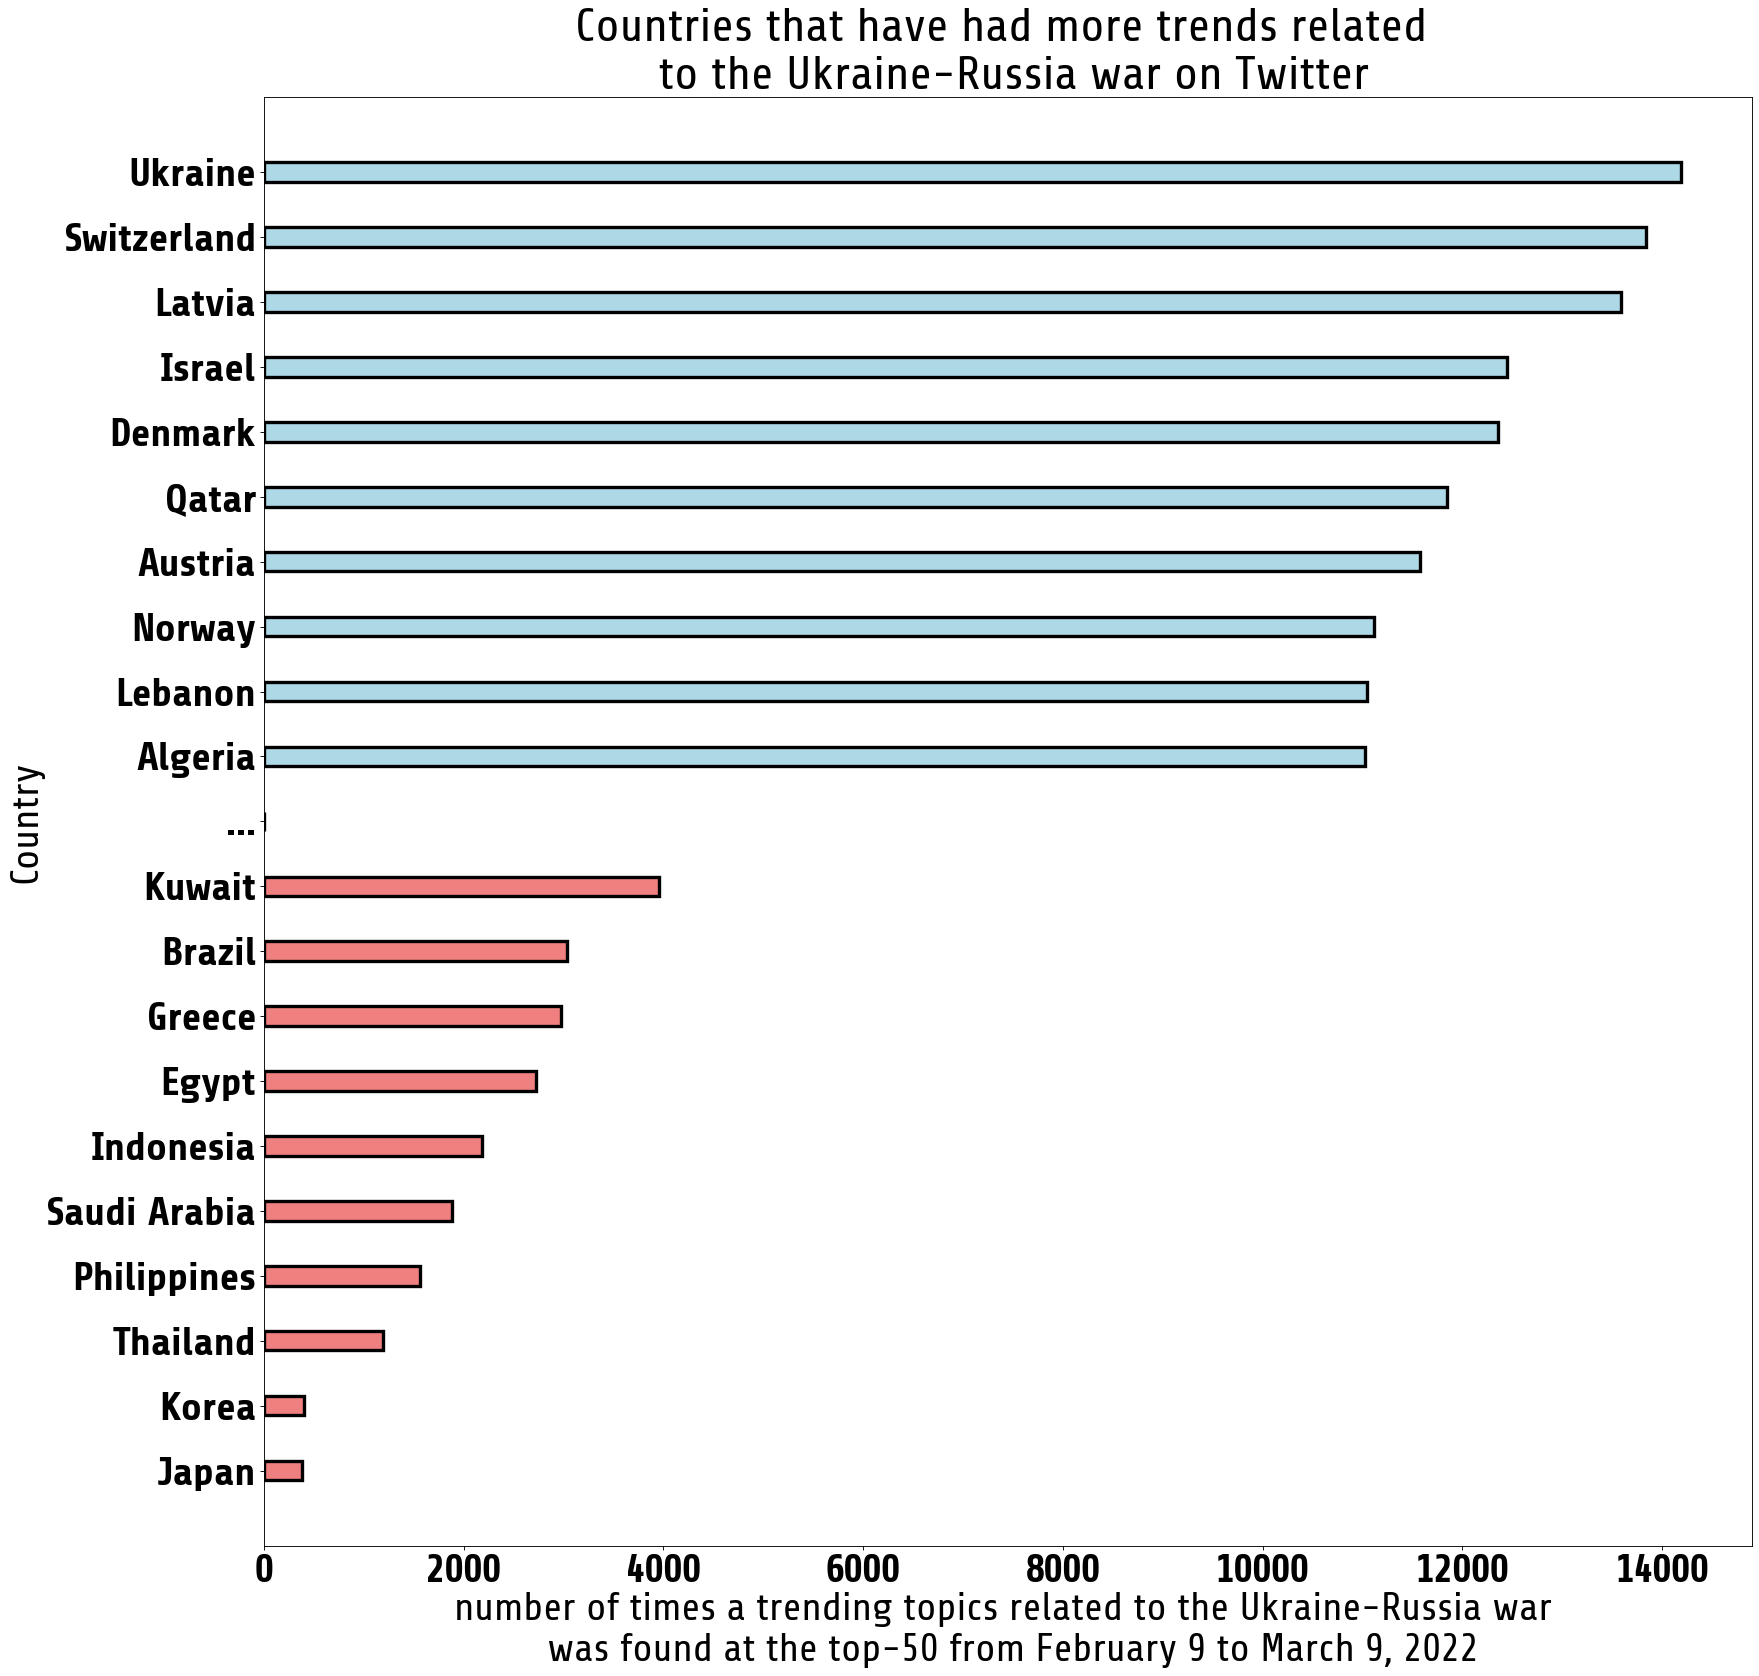 Countries per number of trends related to the Ukraine-Russia war